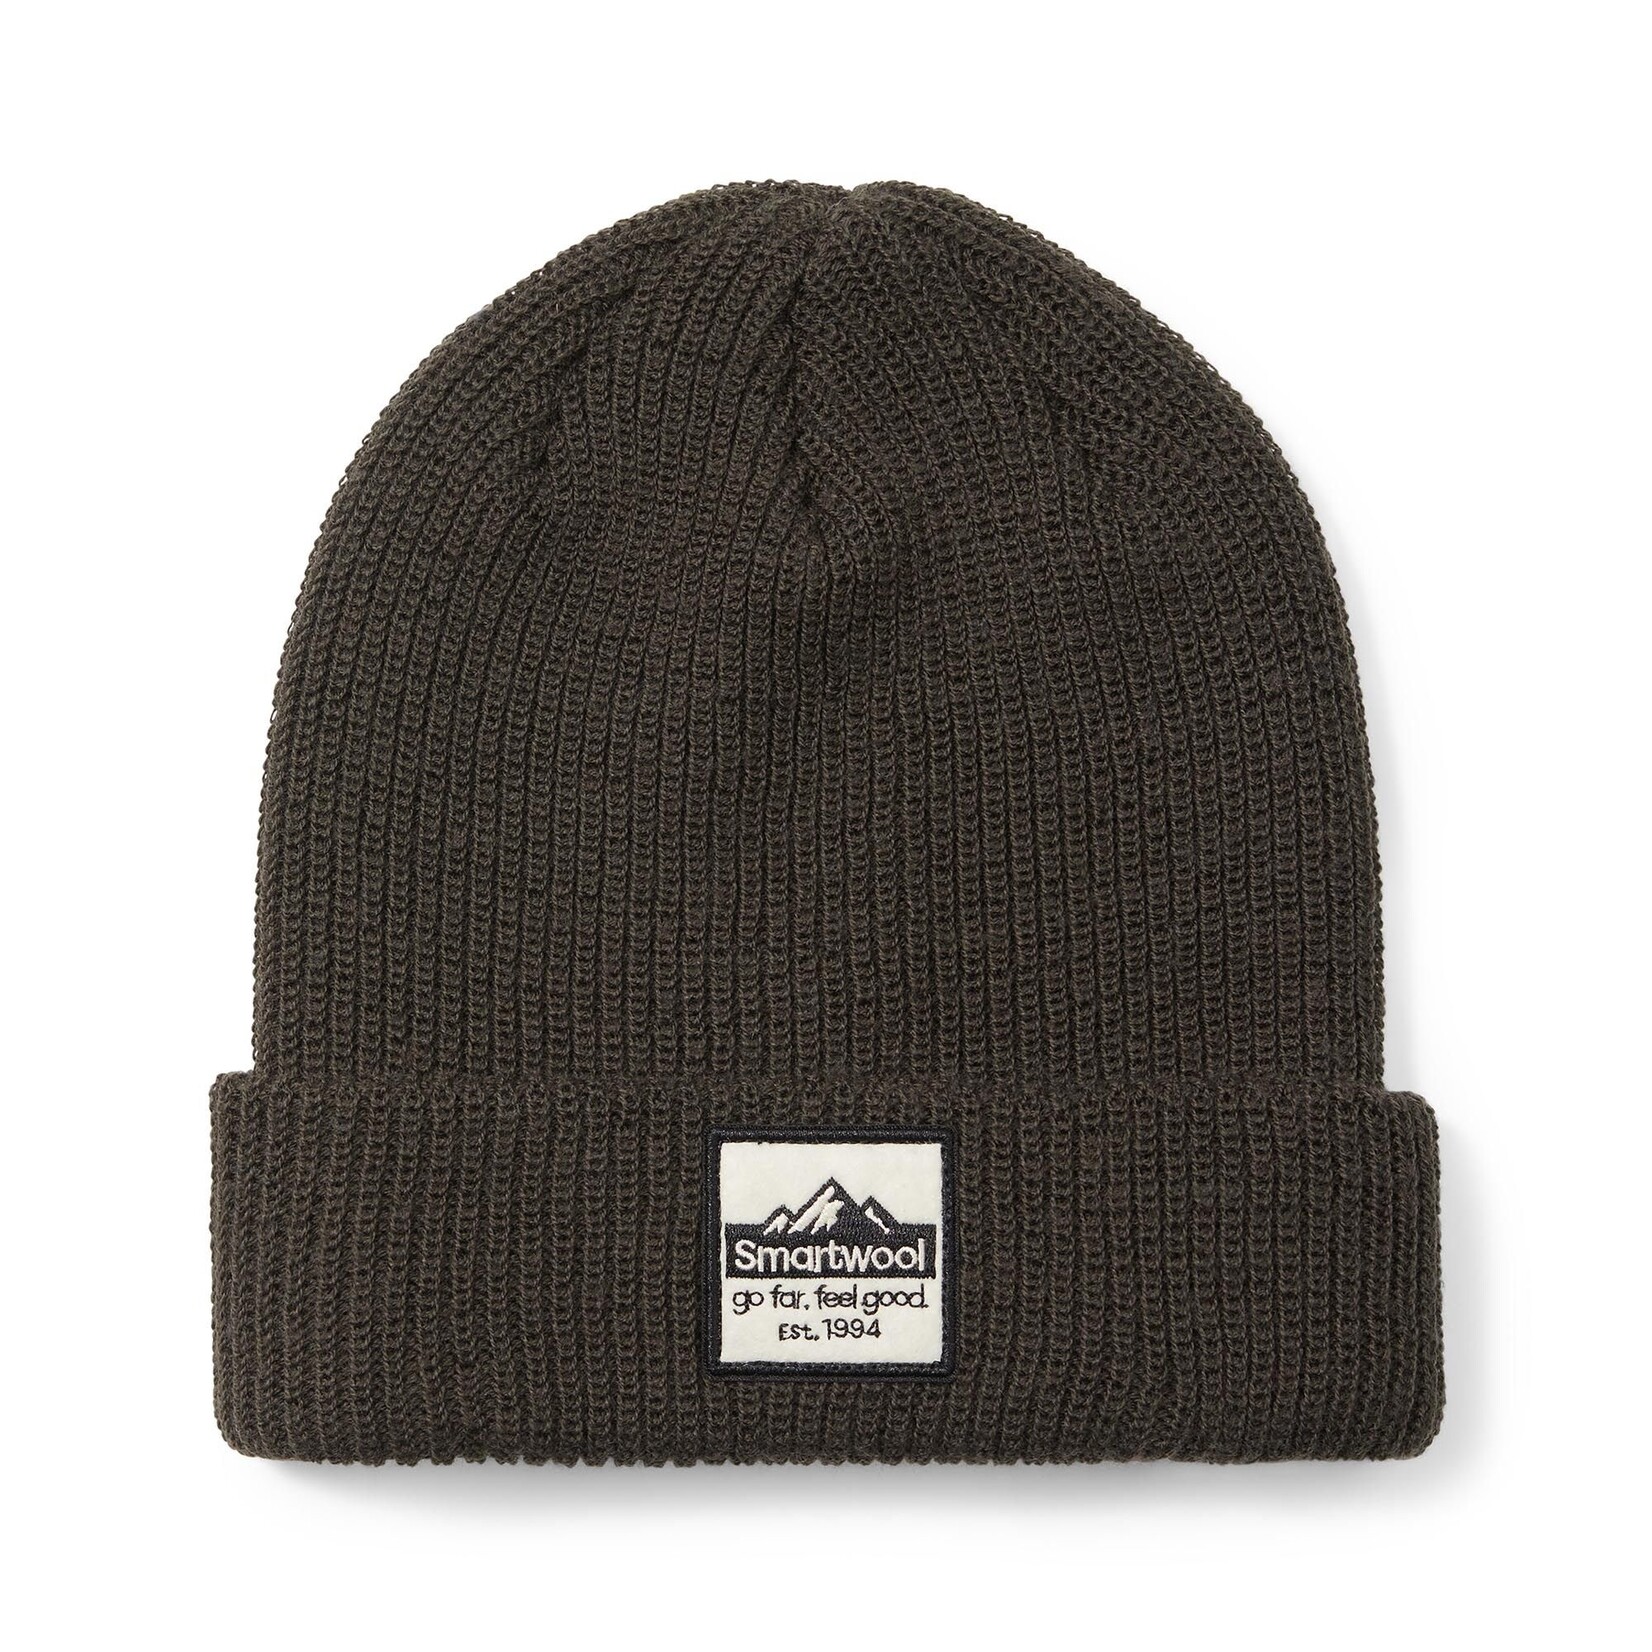 SMARTWOOL Smartwool Smartwool Patch Beanie NORTH WOODS O/S